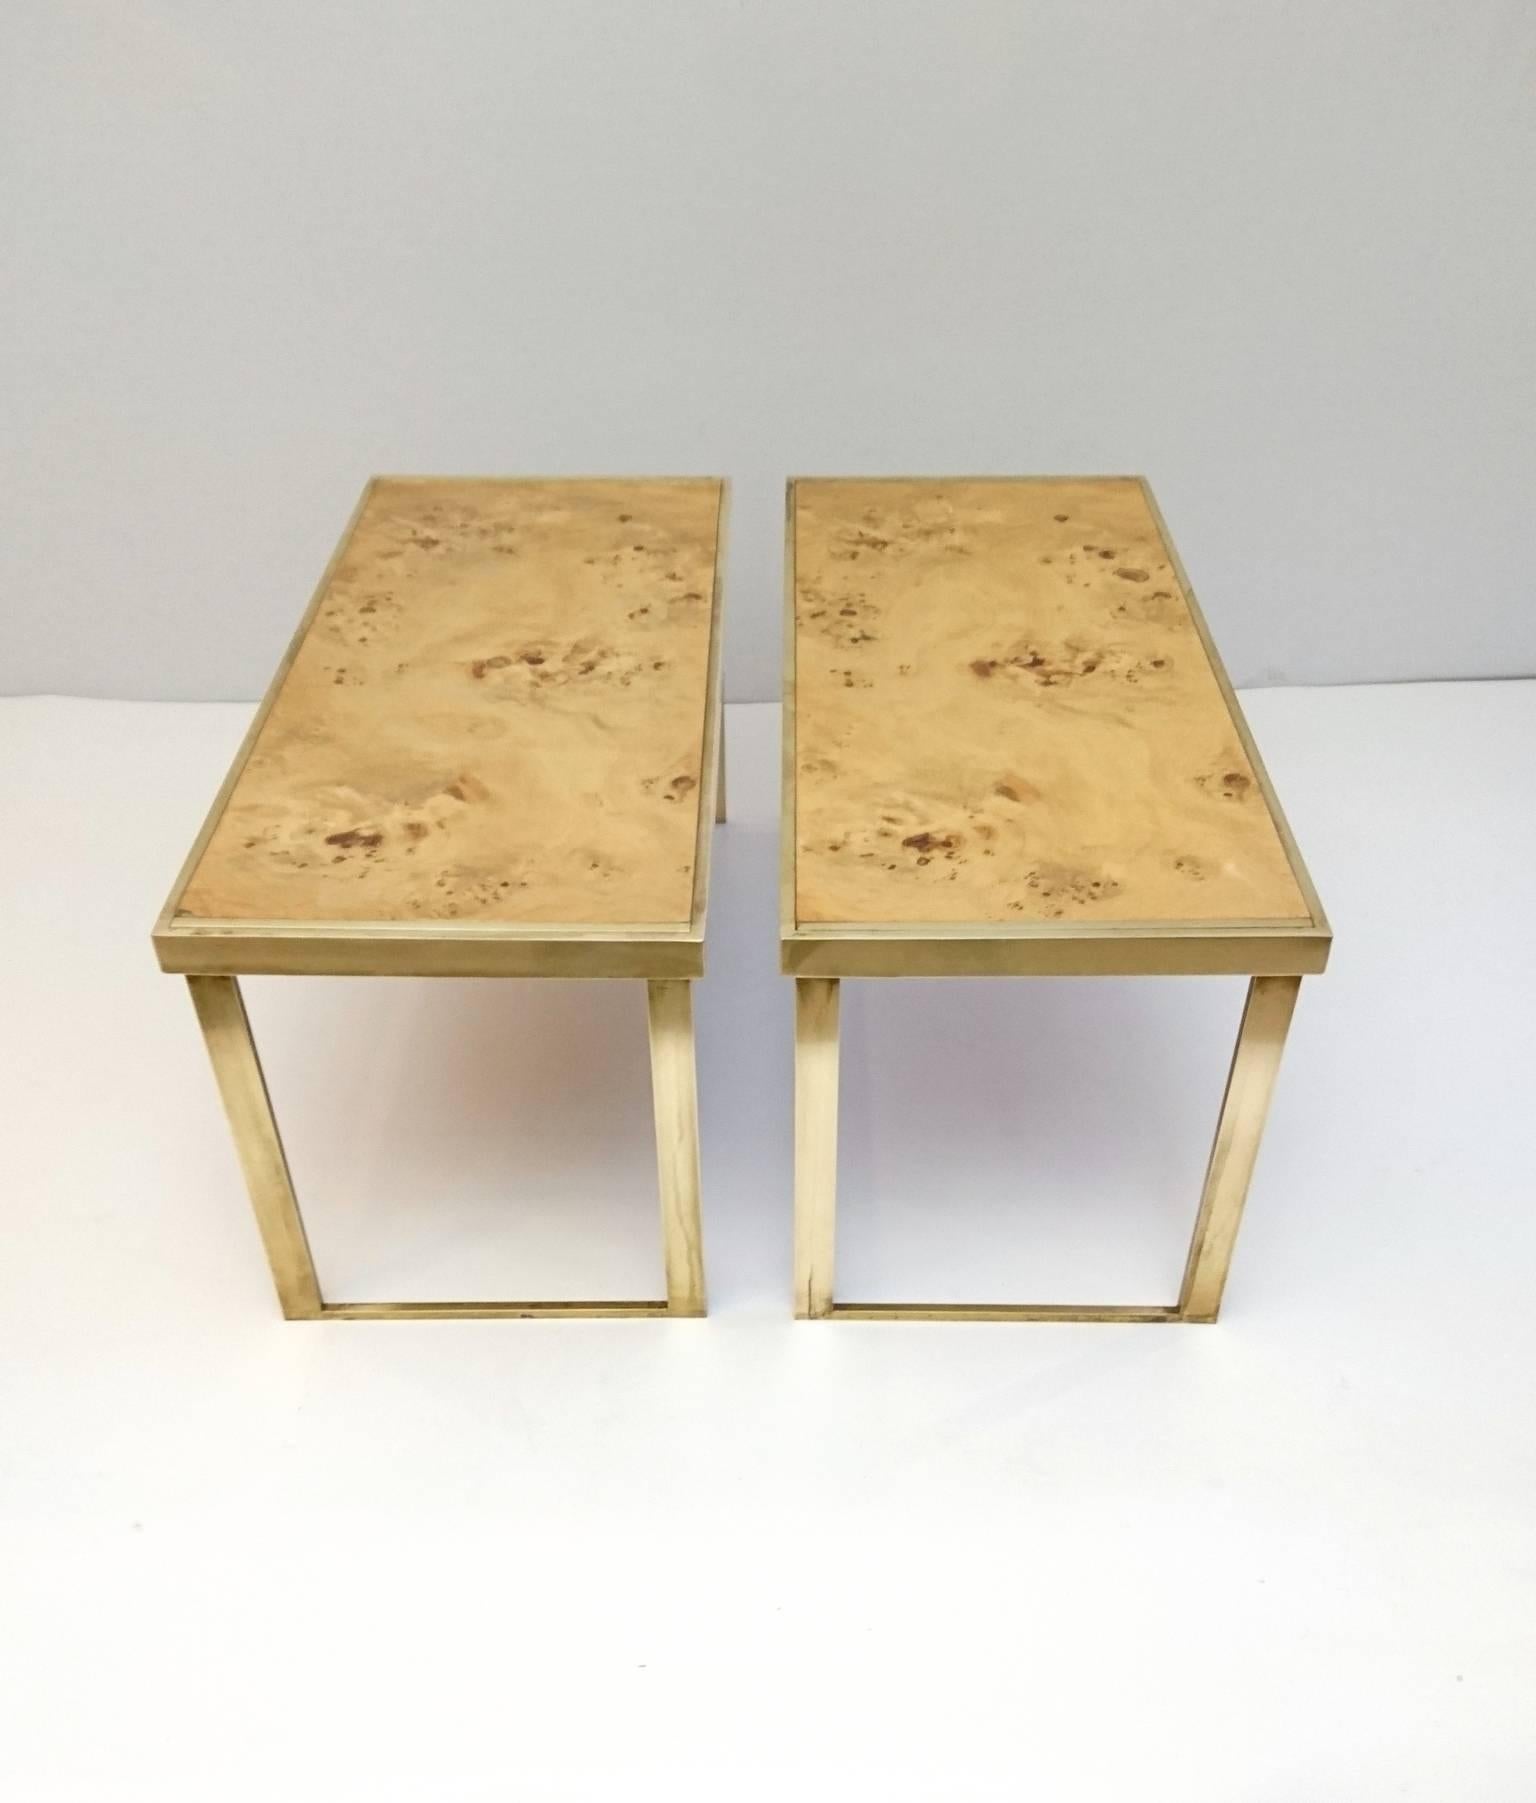 This piece has a great design which has multifunctional uses. It can be stacked as a shelf or used side by side as a square coffee table, a long side table or two separate side tables. The frame is in brass with tops in burl from birch.

Each